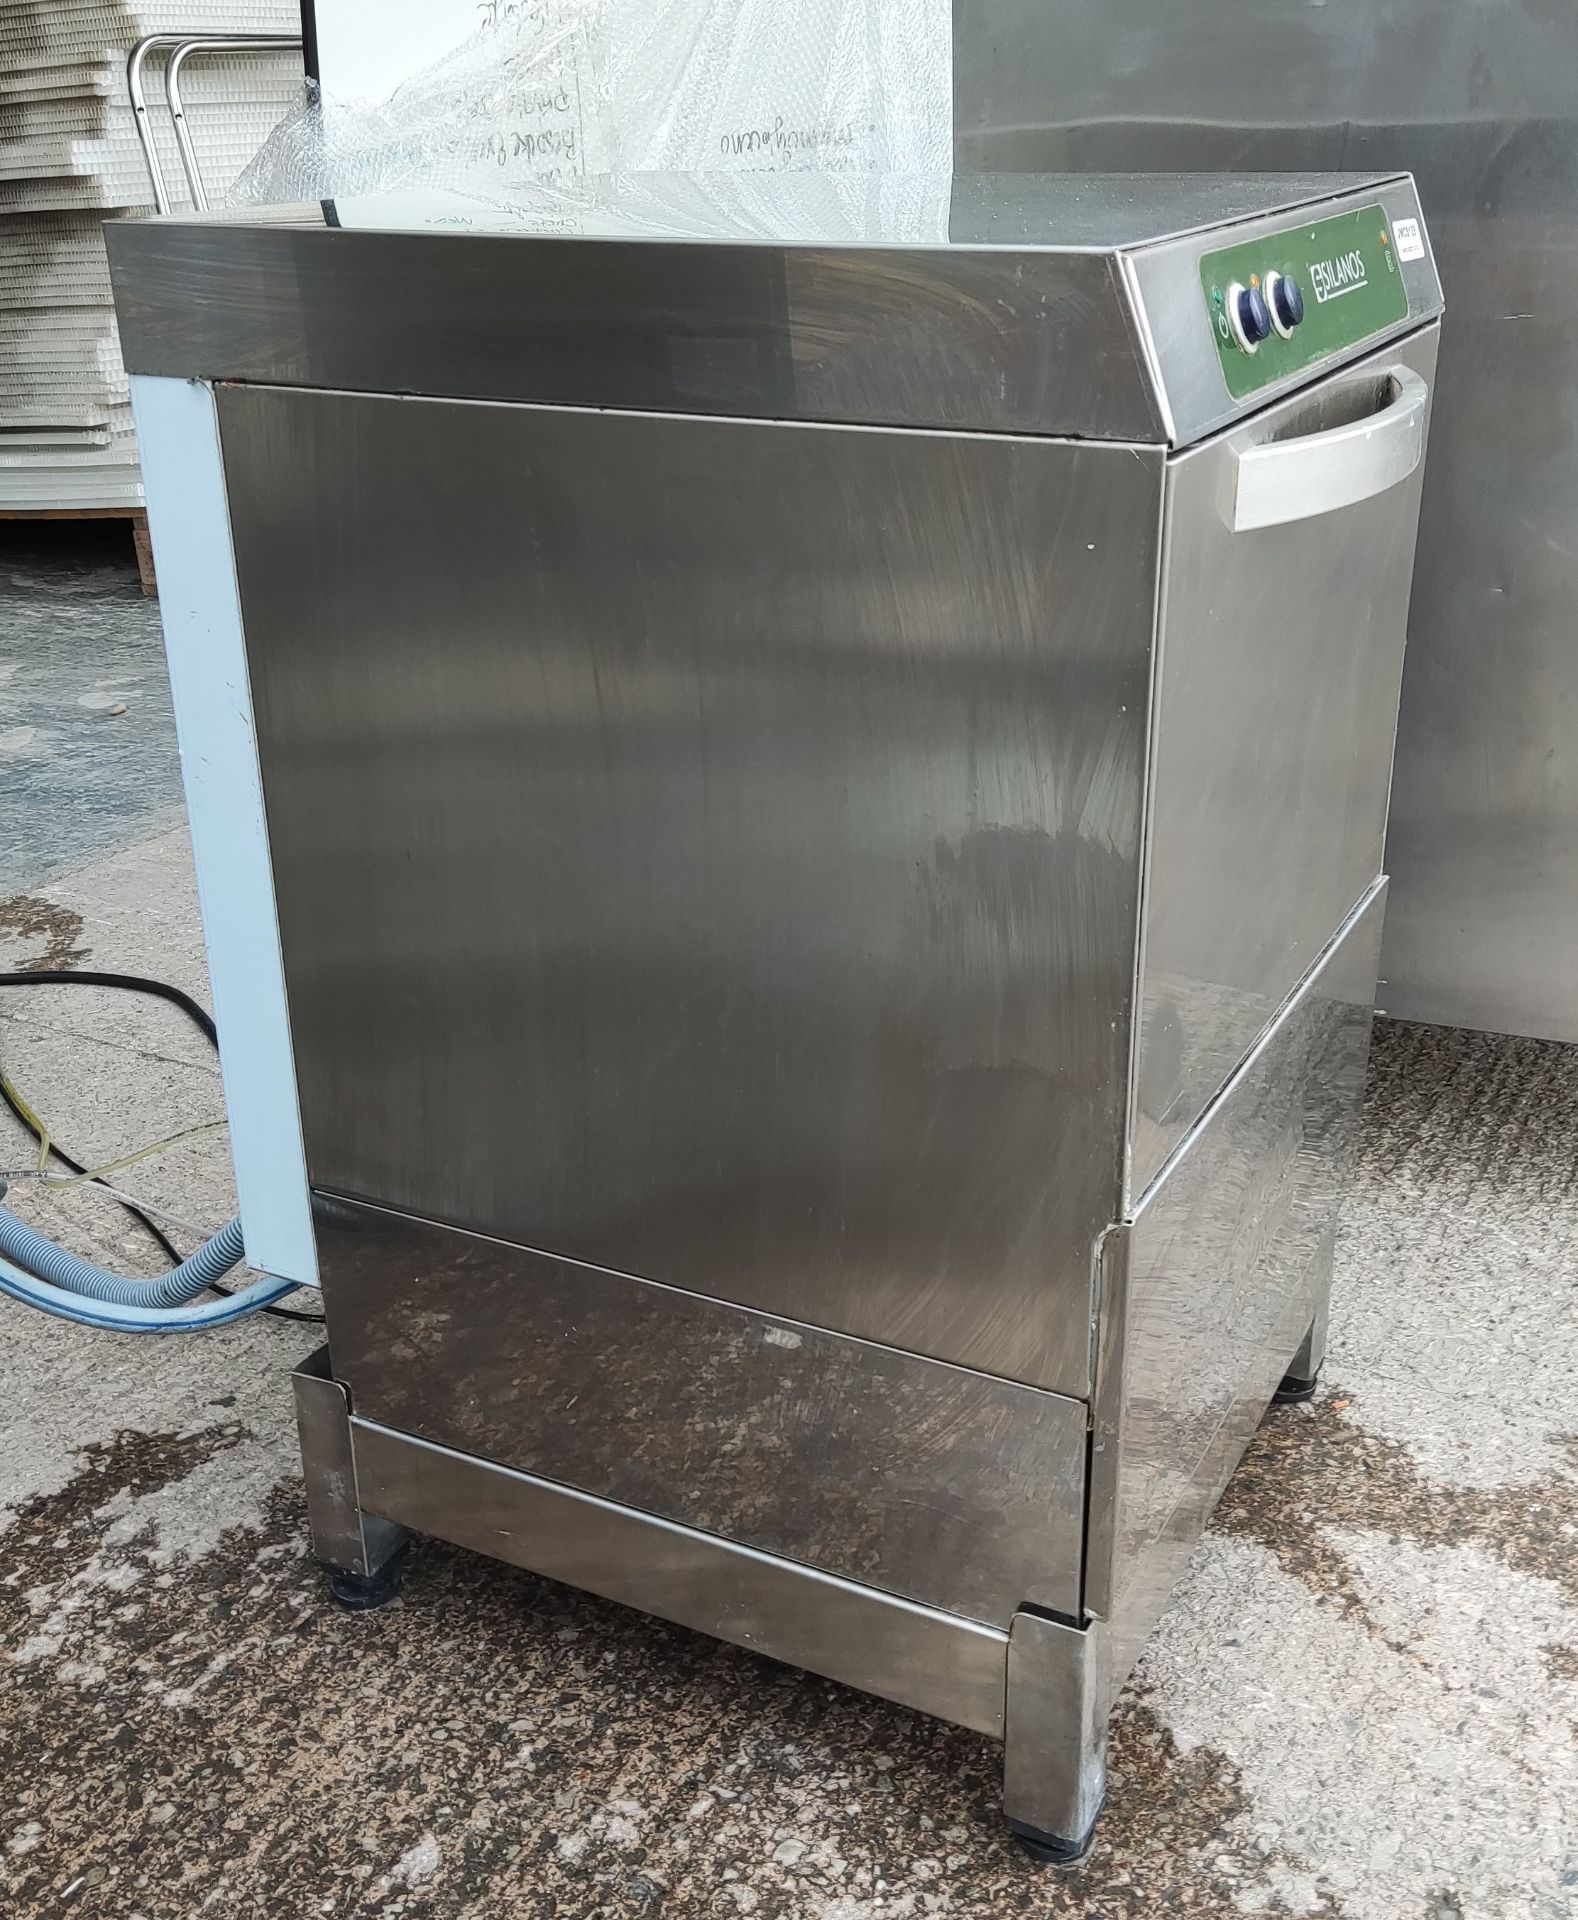 1 x Silanos E40 ECO Undercounter Glass Washer with Low Stand - JMCS125 - CL723 - Location: Altrincha - Image 10 of 12